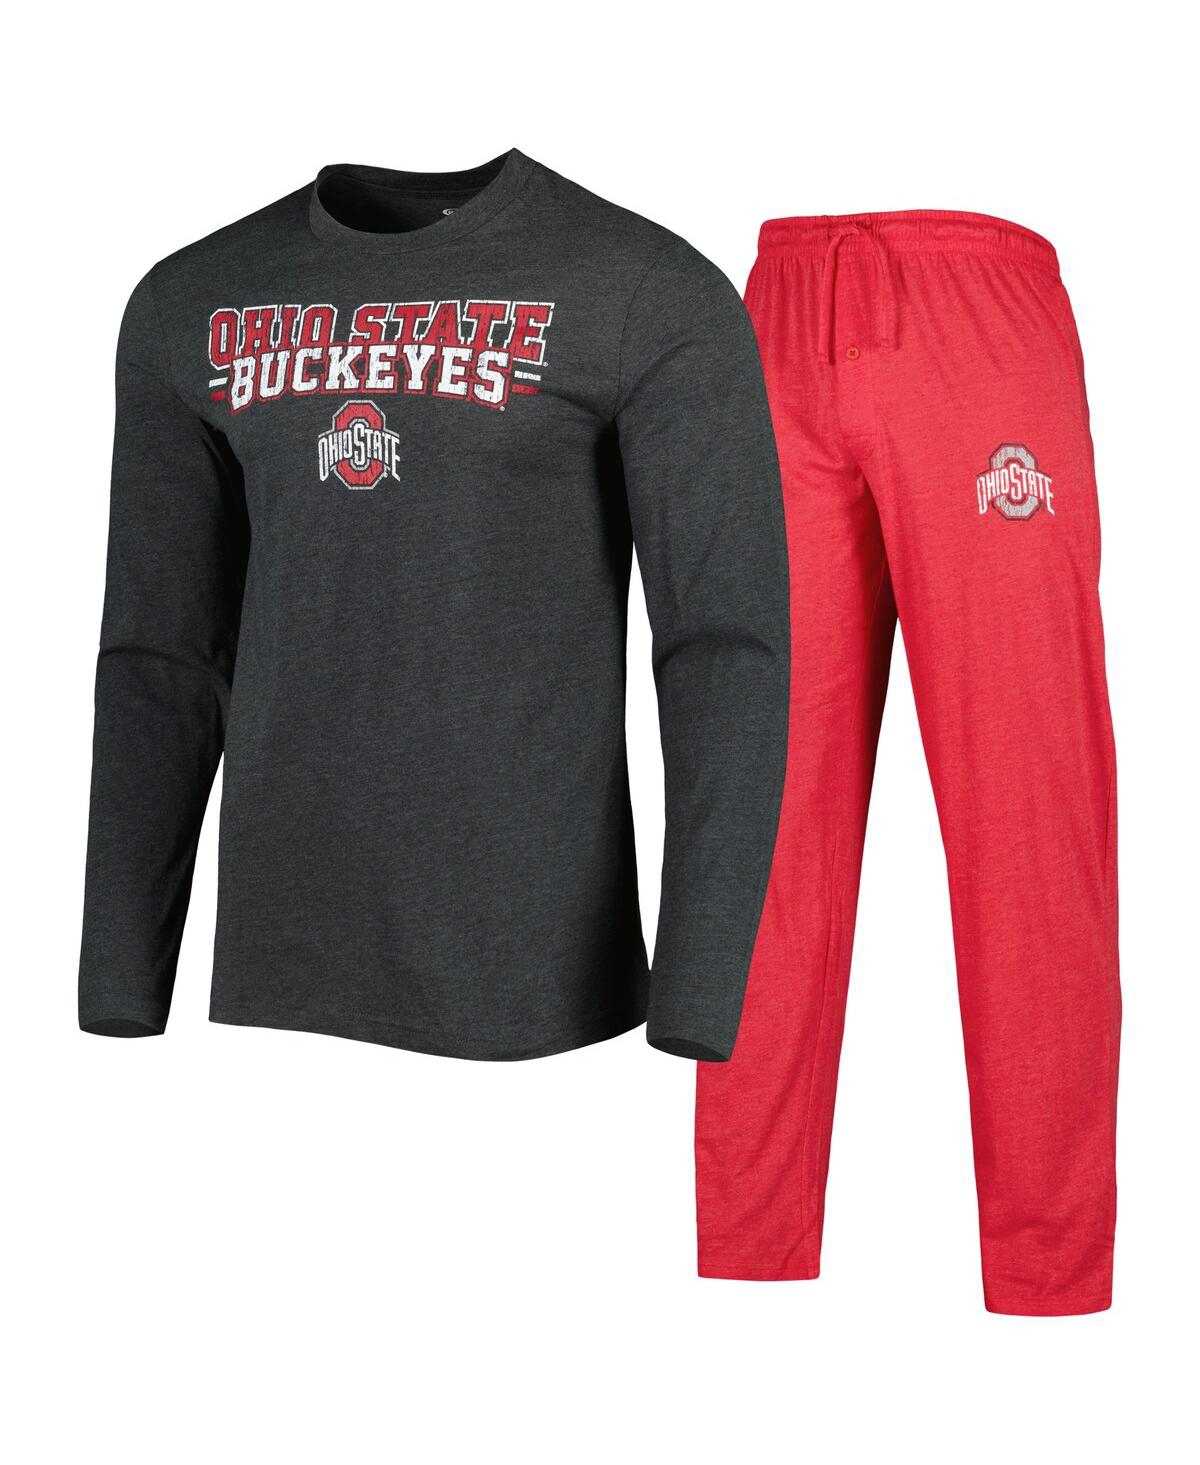 Men's Concepts Sport Heathered Scarlet, Heathered Charcoal Ohio State Buckeyes Meter Long Sleeve T-shirt and Pants Sleep Set - Scarlet, Heathered Char